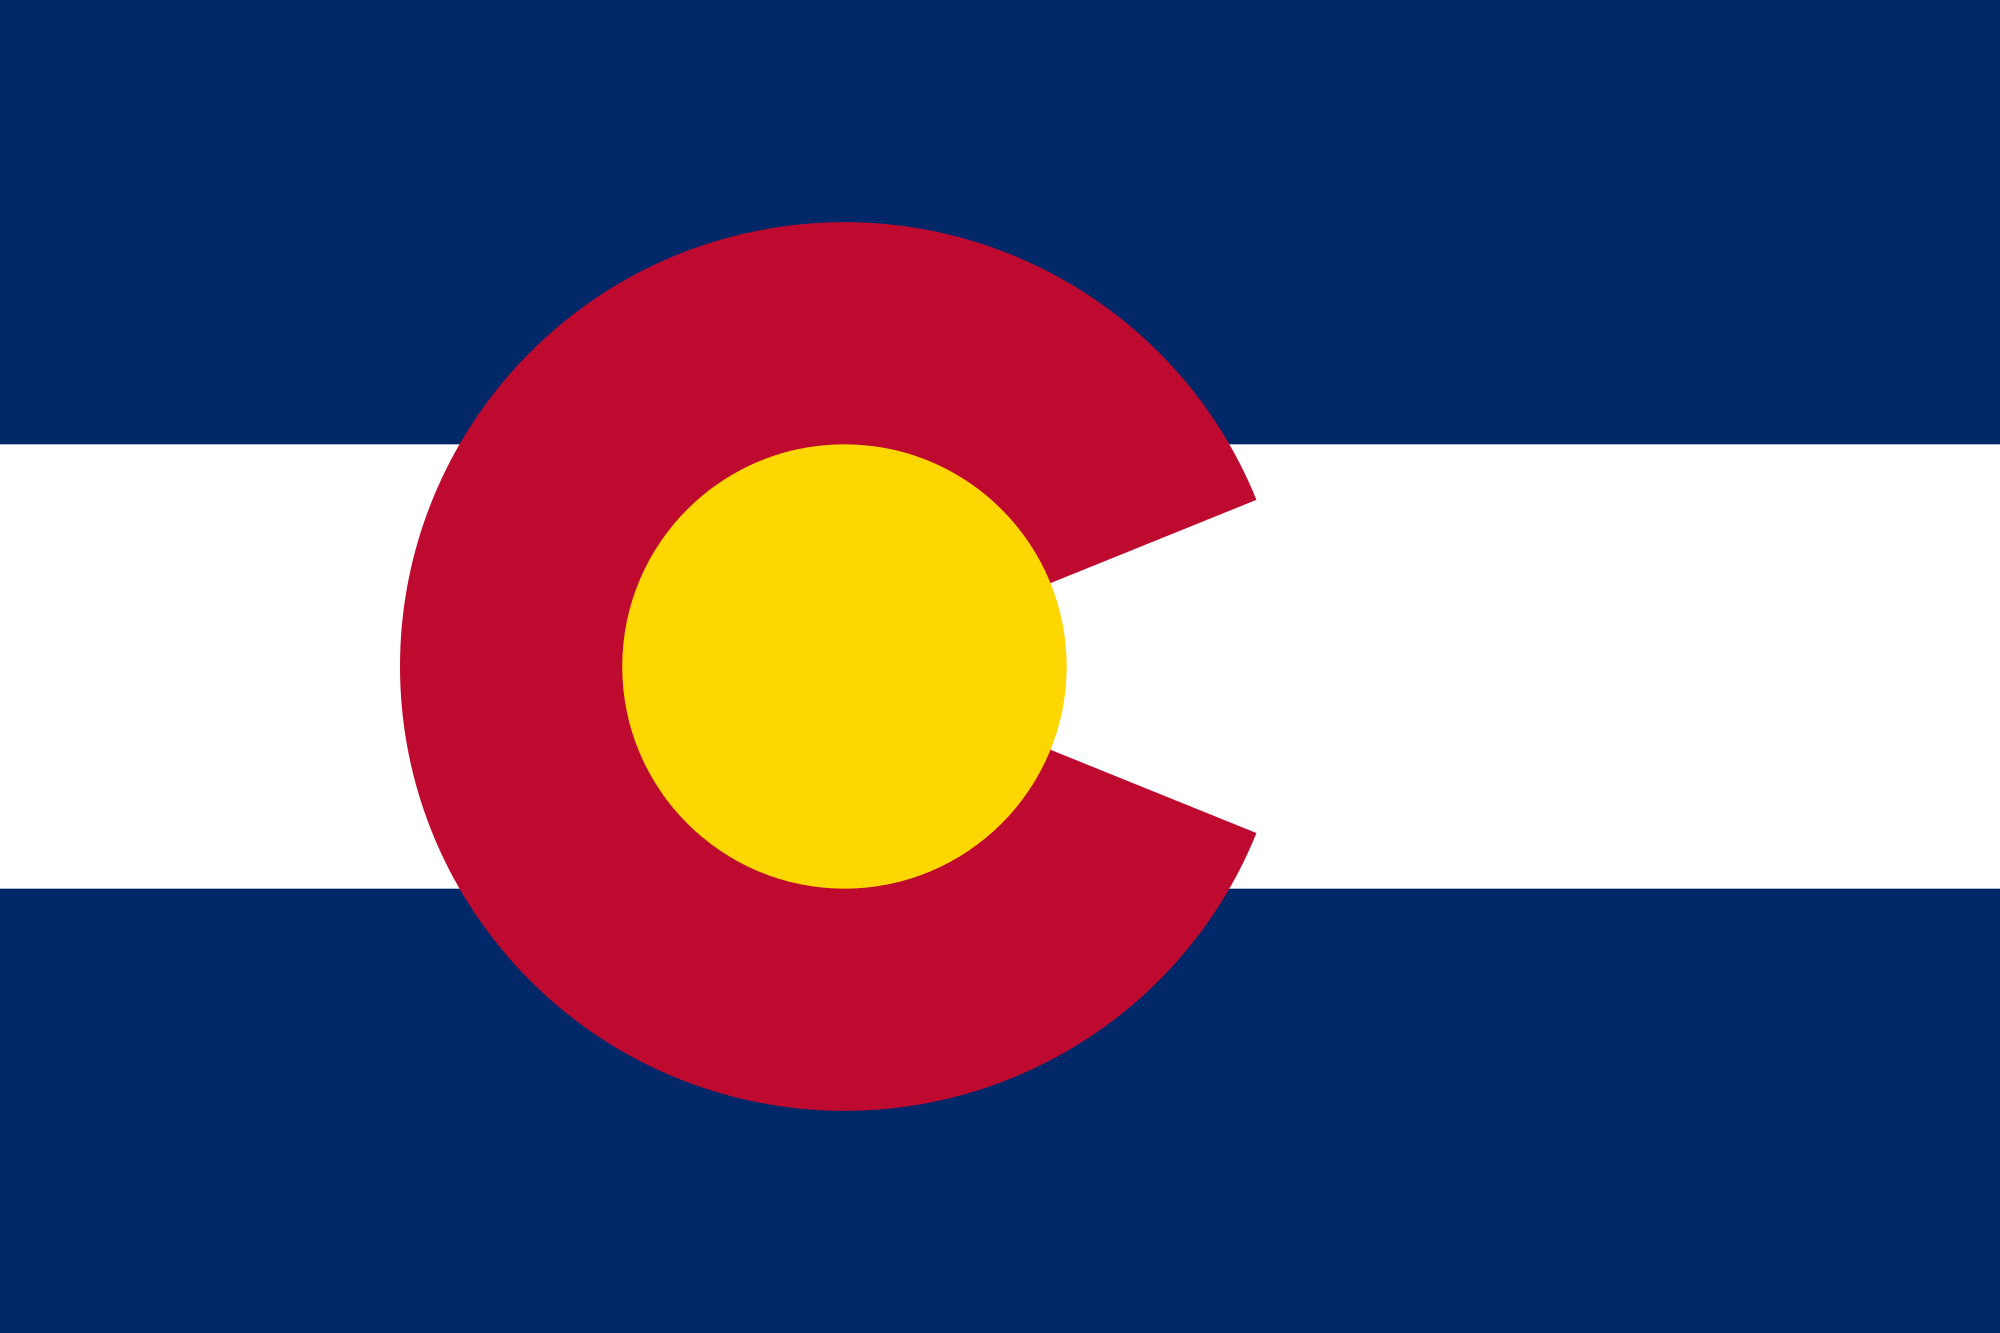 Colorado state flag with 3 horizontal stripes of blue, white, and blue and a red letter, C, filled with a gold circle.